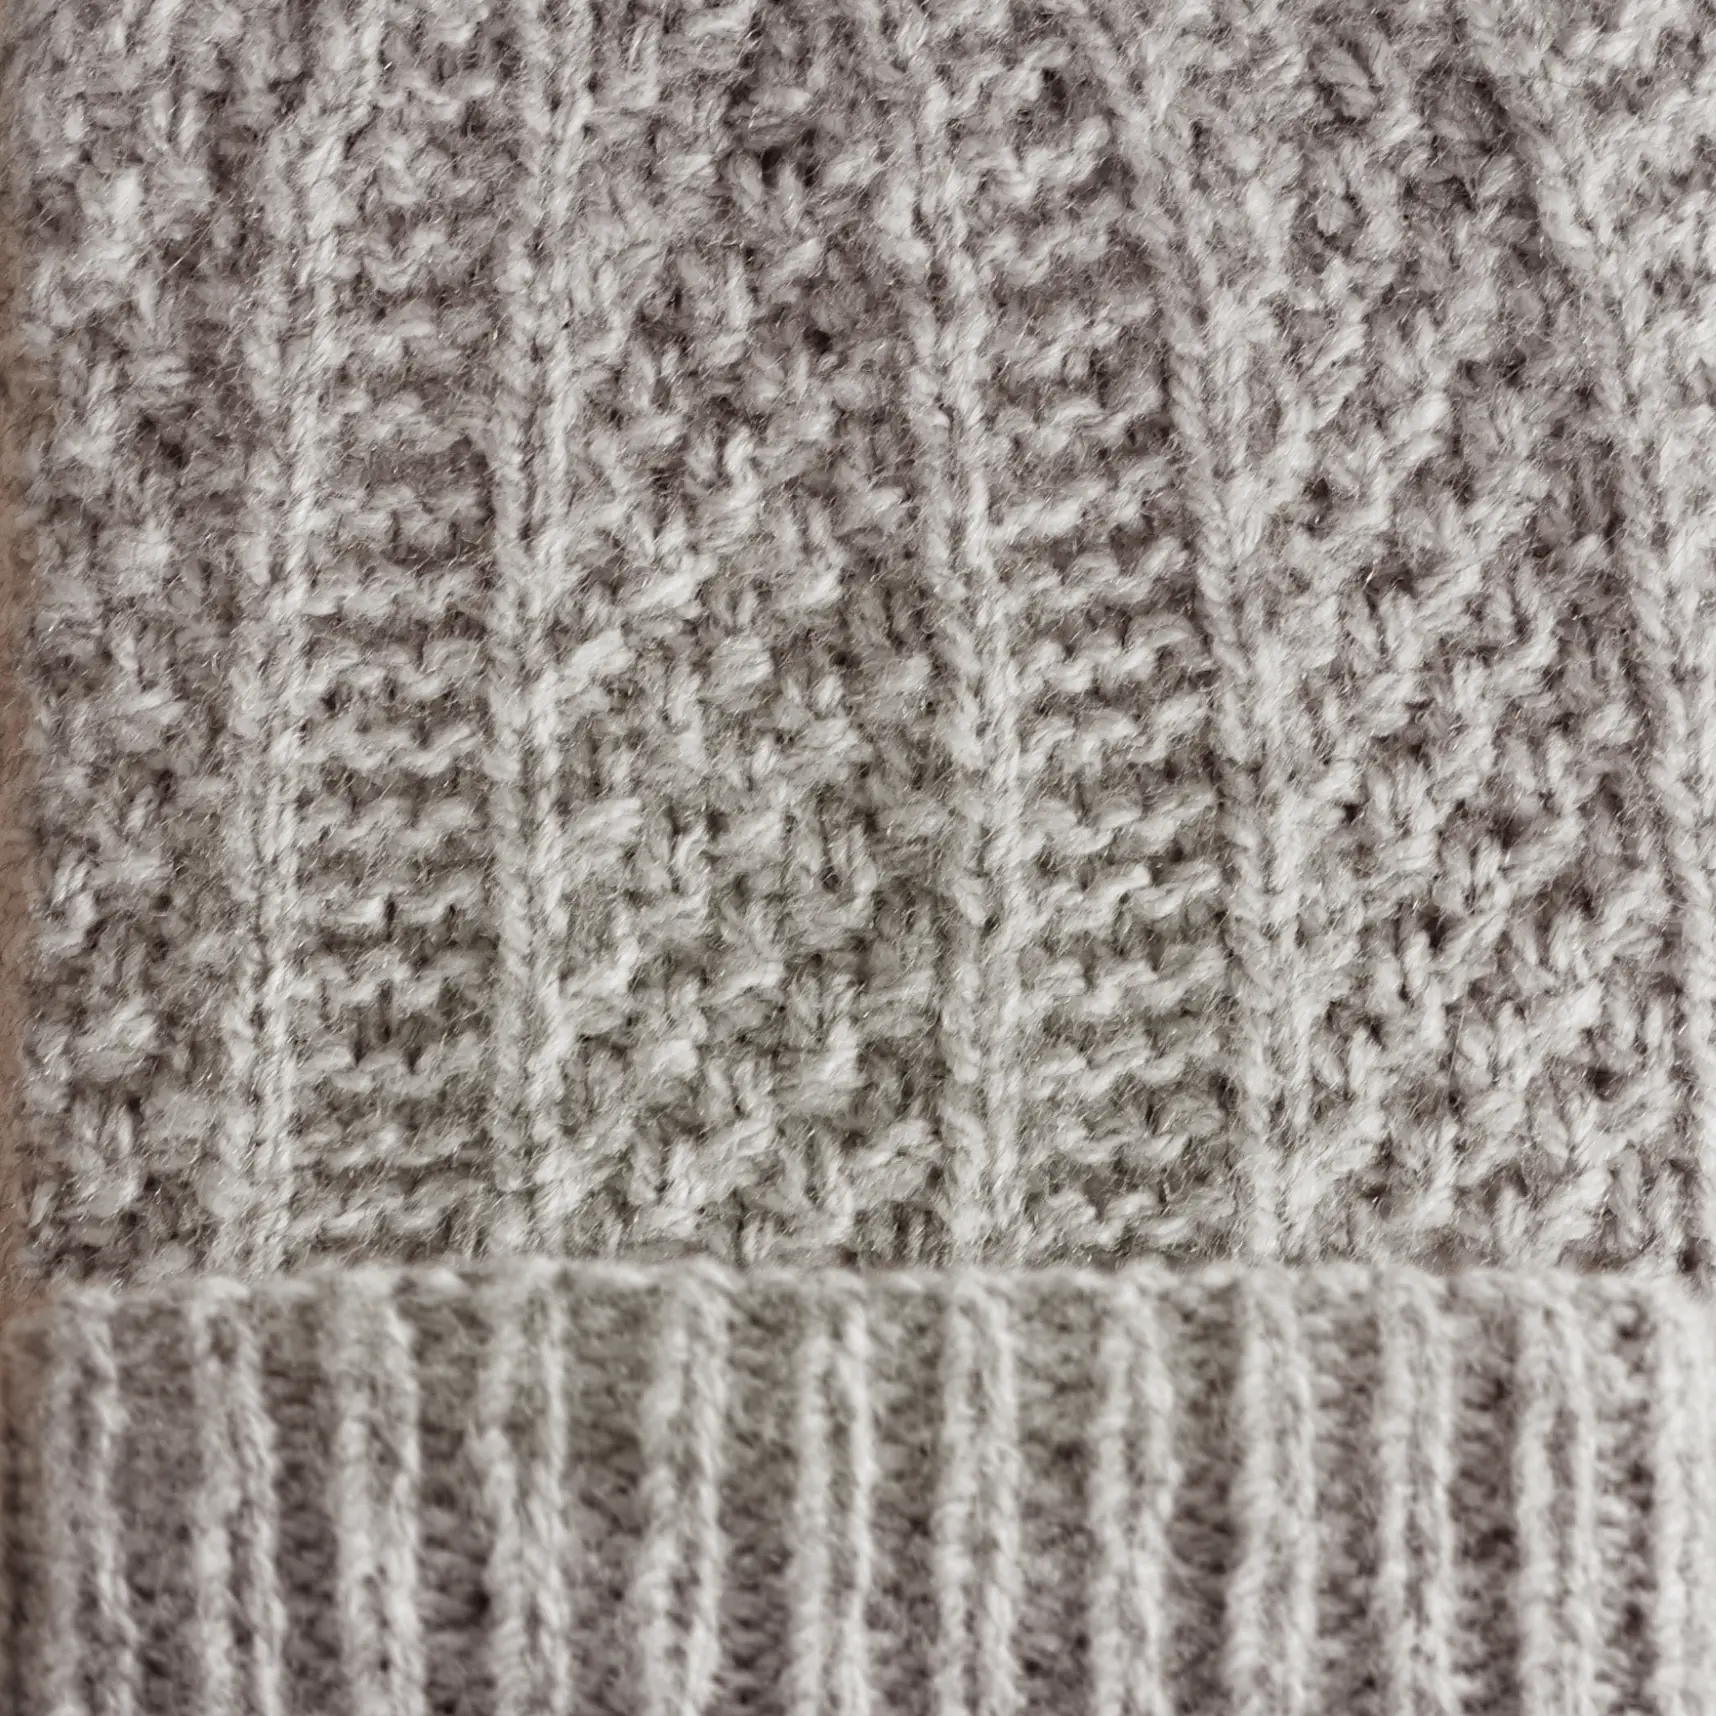 Close up of cambronne beanie stitches including garter, ribbing, and double seed stitch